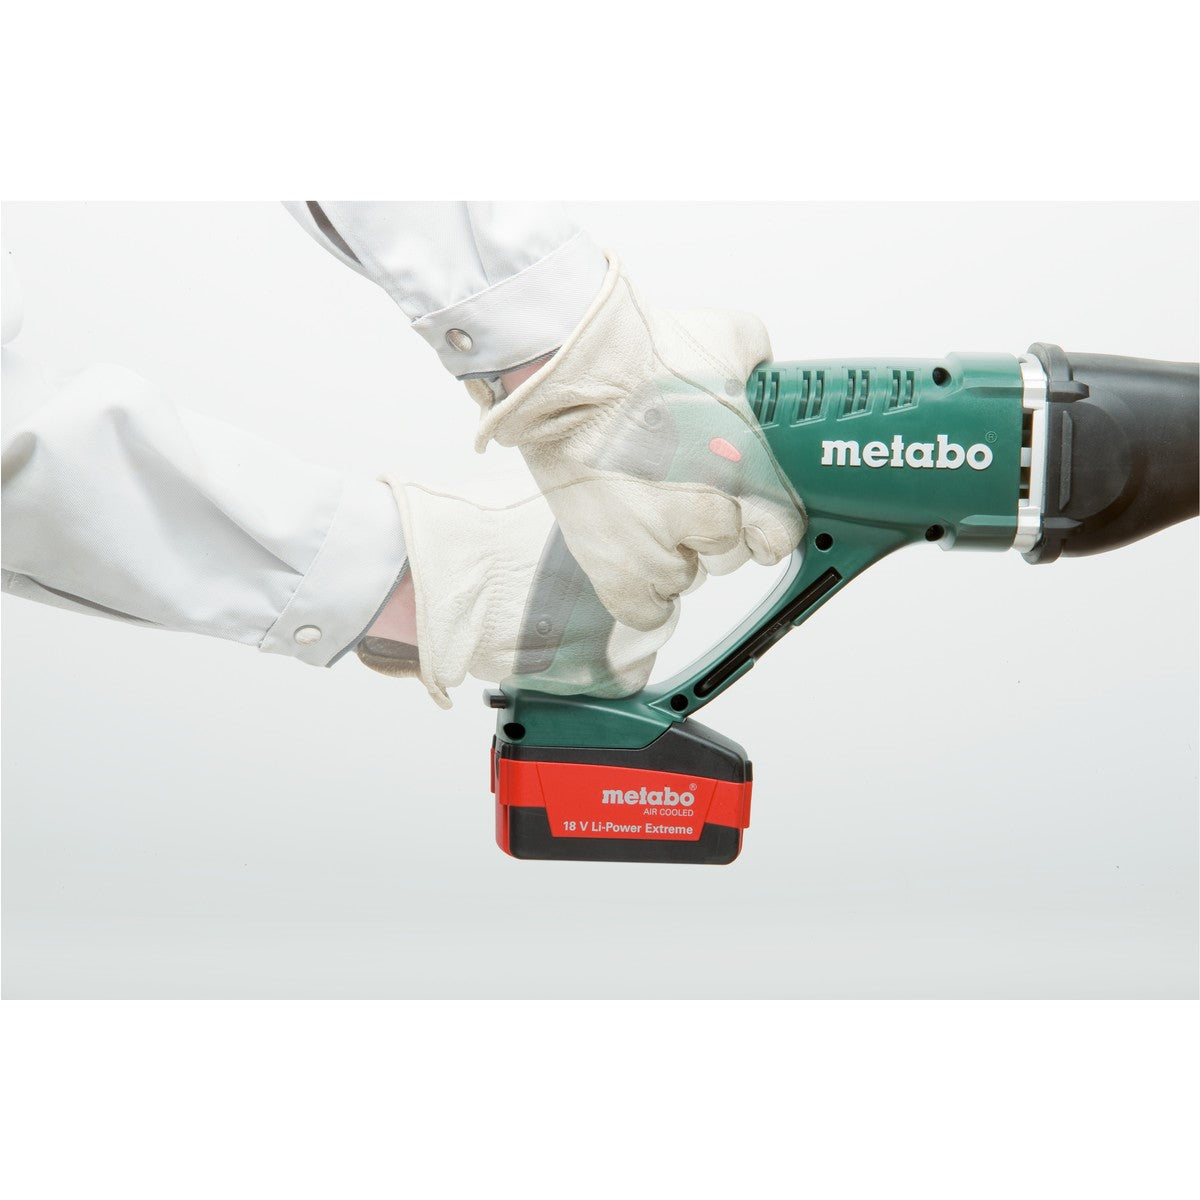 Metabo (602269850) ASE 18V LTX Cordless Reciprocating Saw Bare Tool image 1 of 4 image 2 of 4